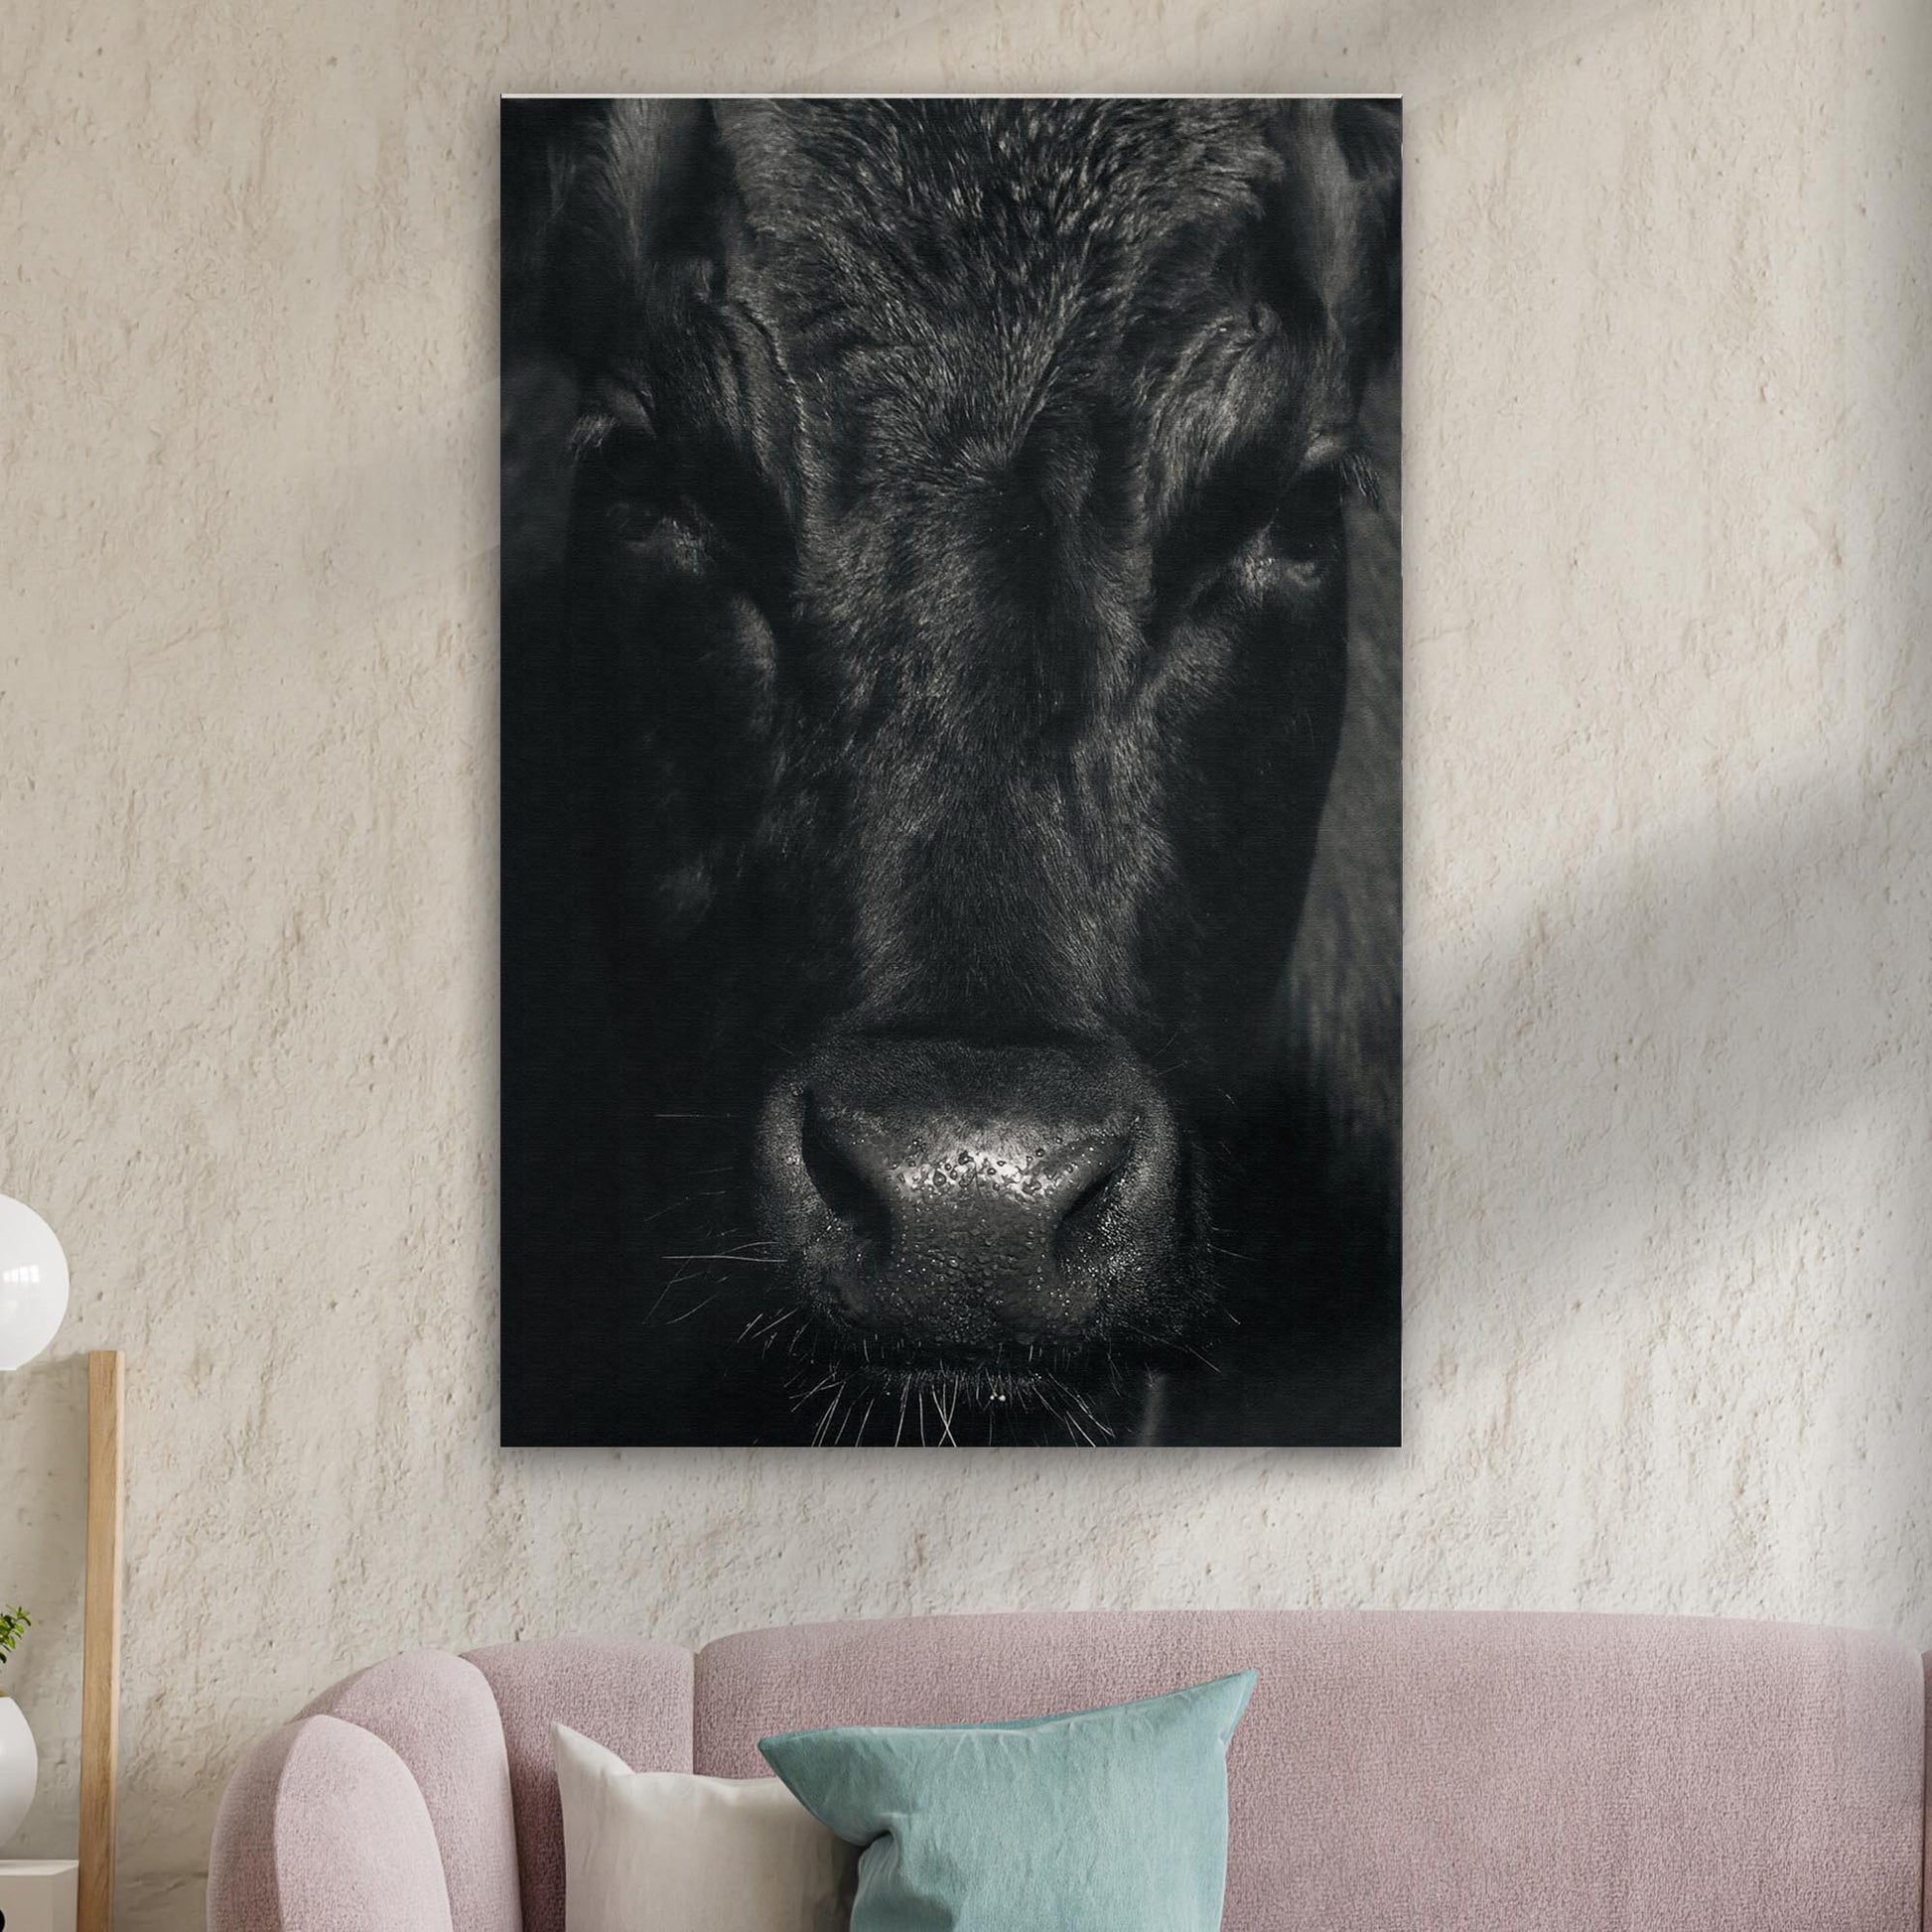 Black Angus Bull Portrait Canvas Wall Art - Image by Tailored Canvases